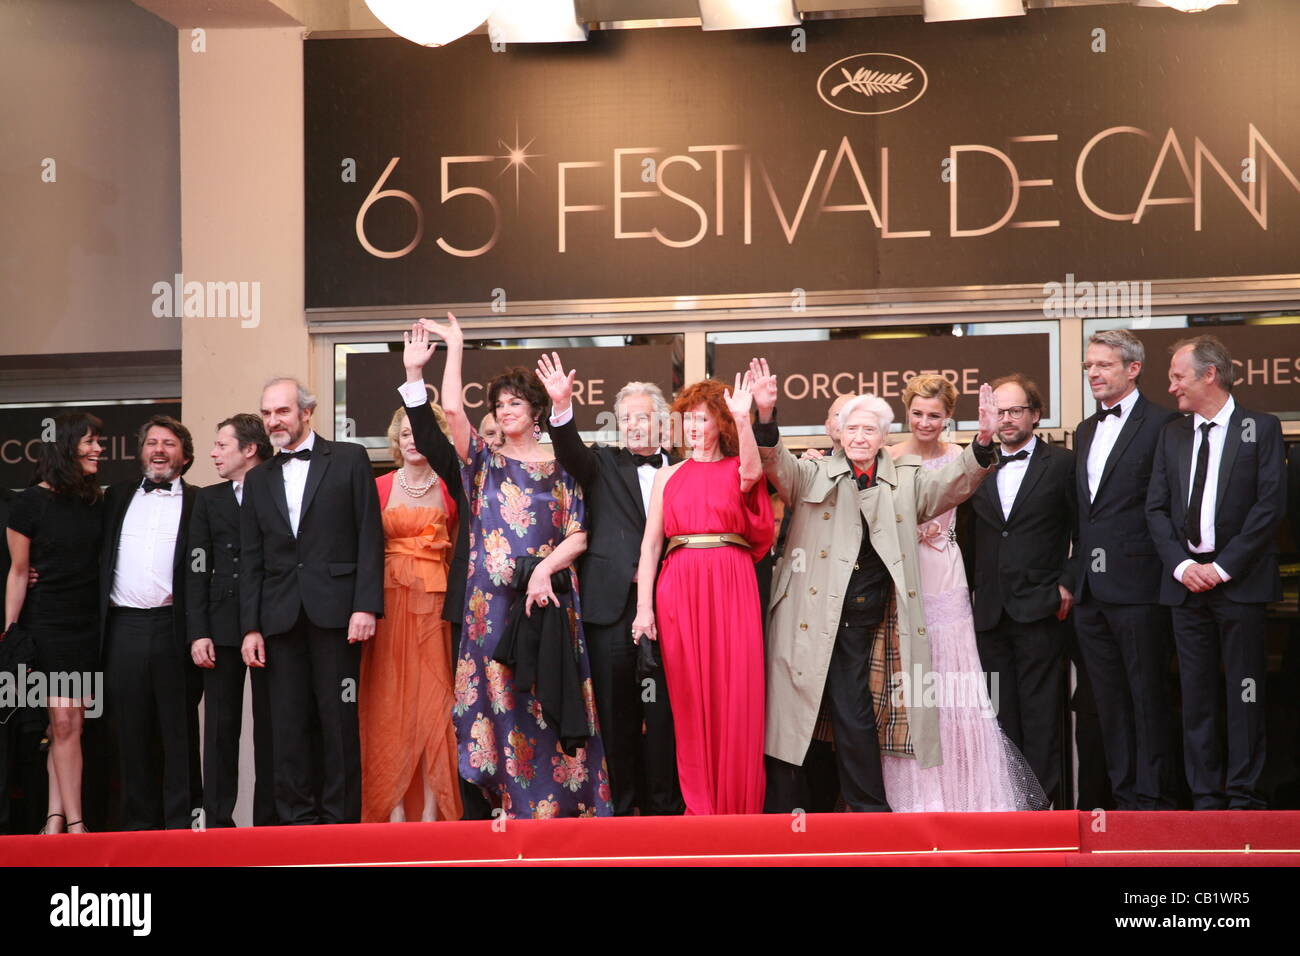 The cast and director arriving at the Vous N'Avez Encore Rien Vu gala screening at the 65th Cannes Film Festival France. Monday 21st May 2012 in Cannes Film Festival, France. Stock Photo